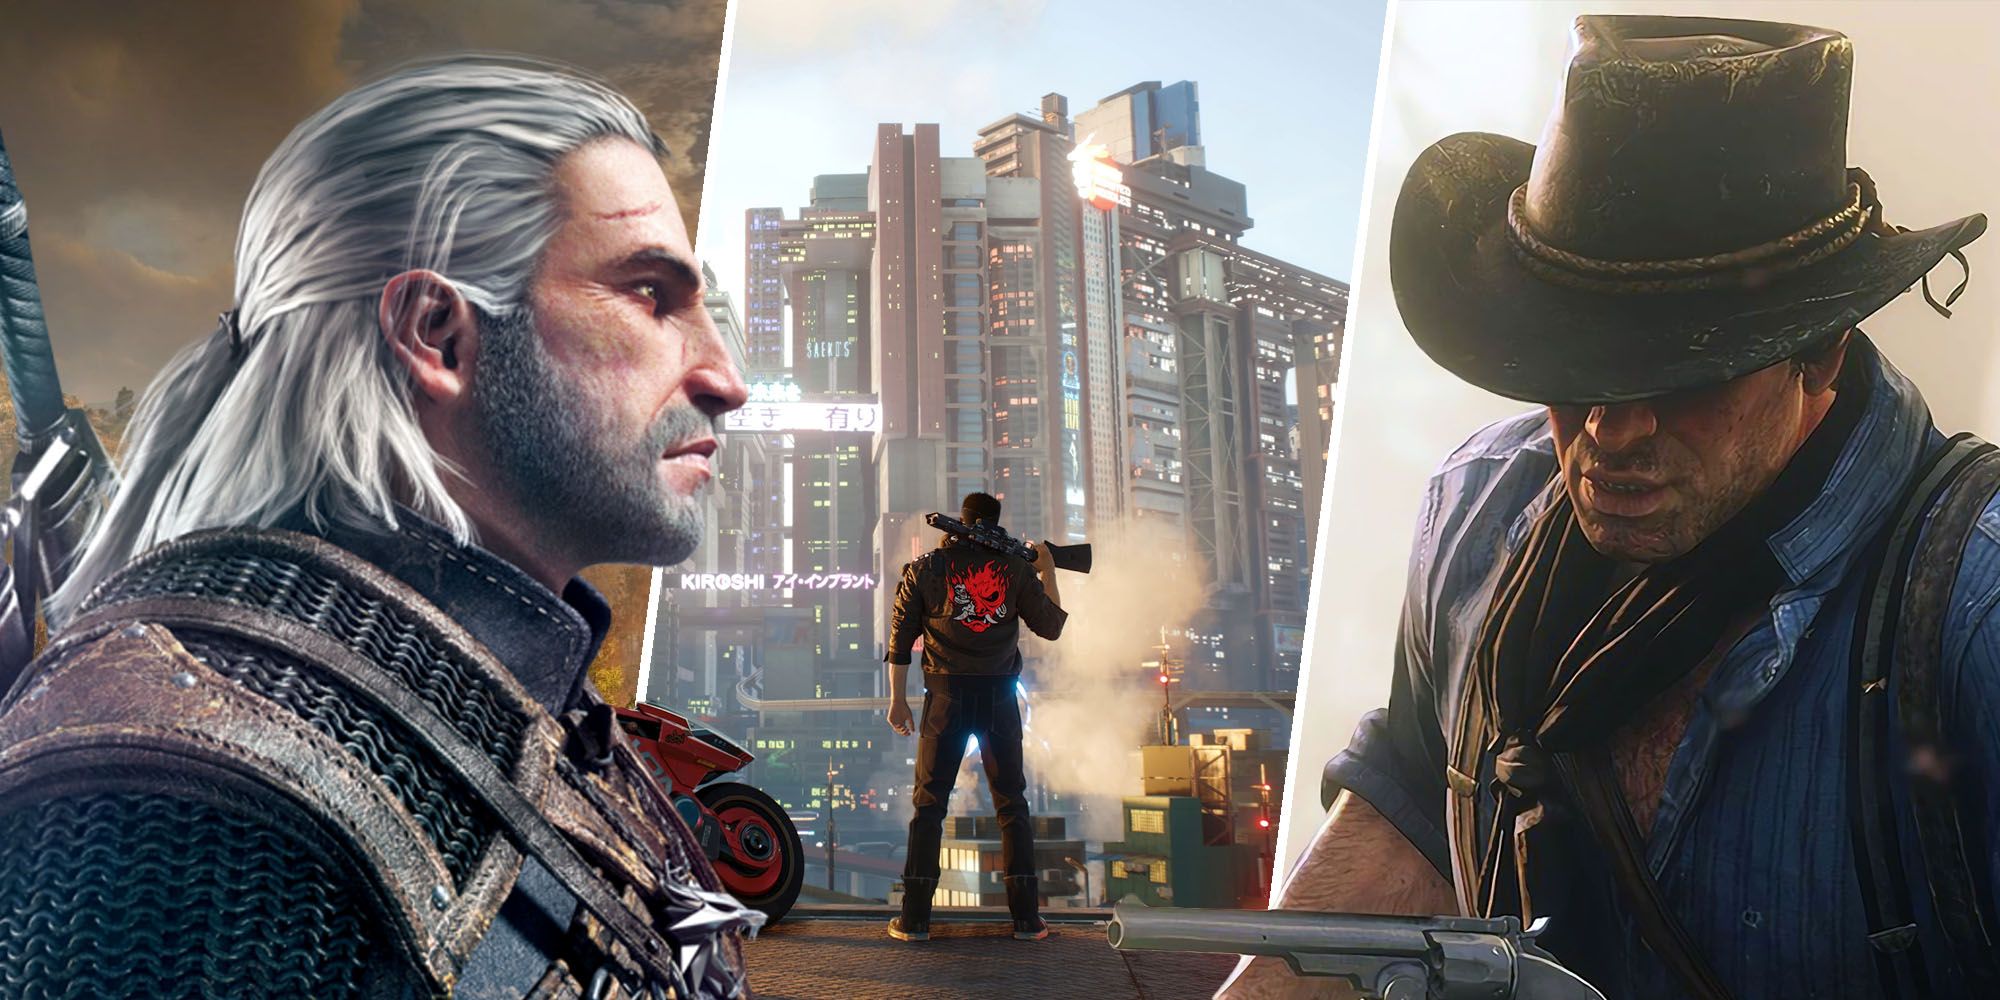 The Witcher 3, Cyberpunk 2077, and Red Dead Redemption 2